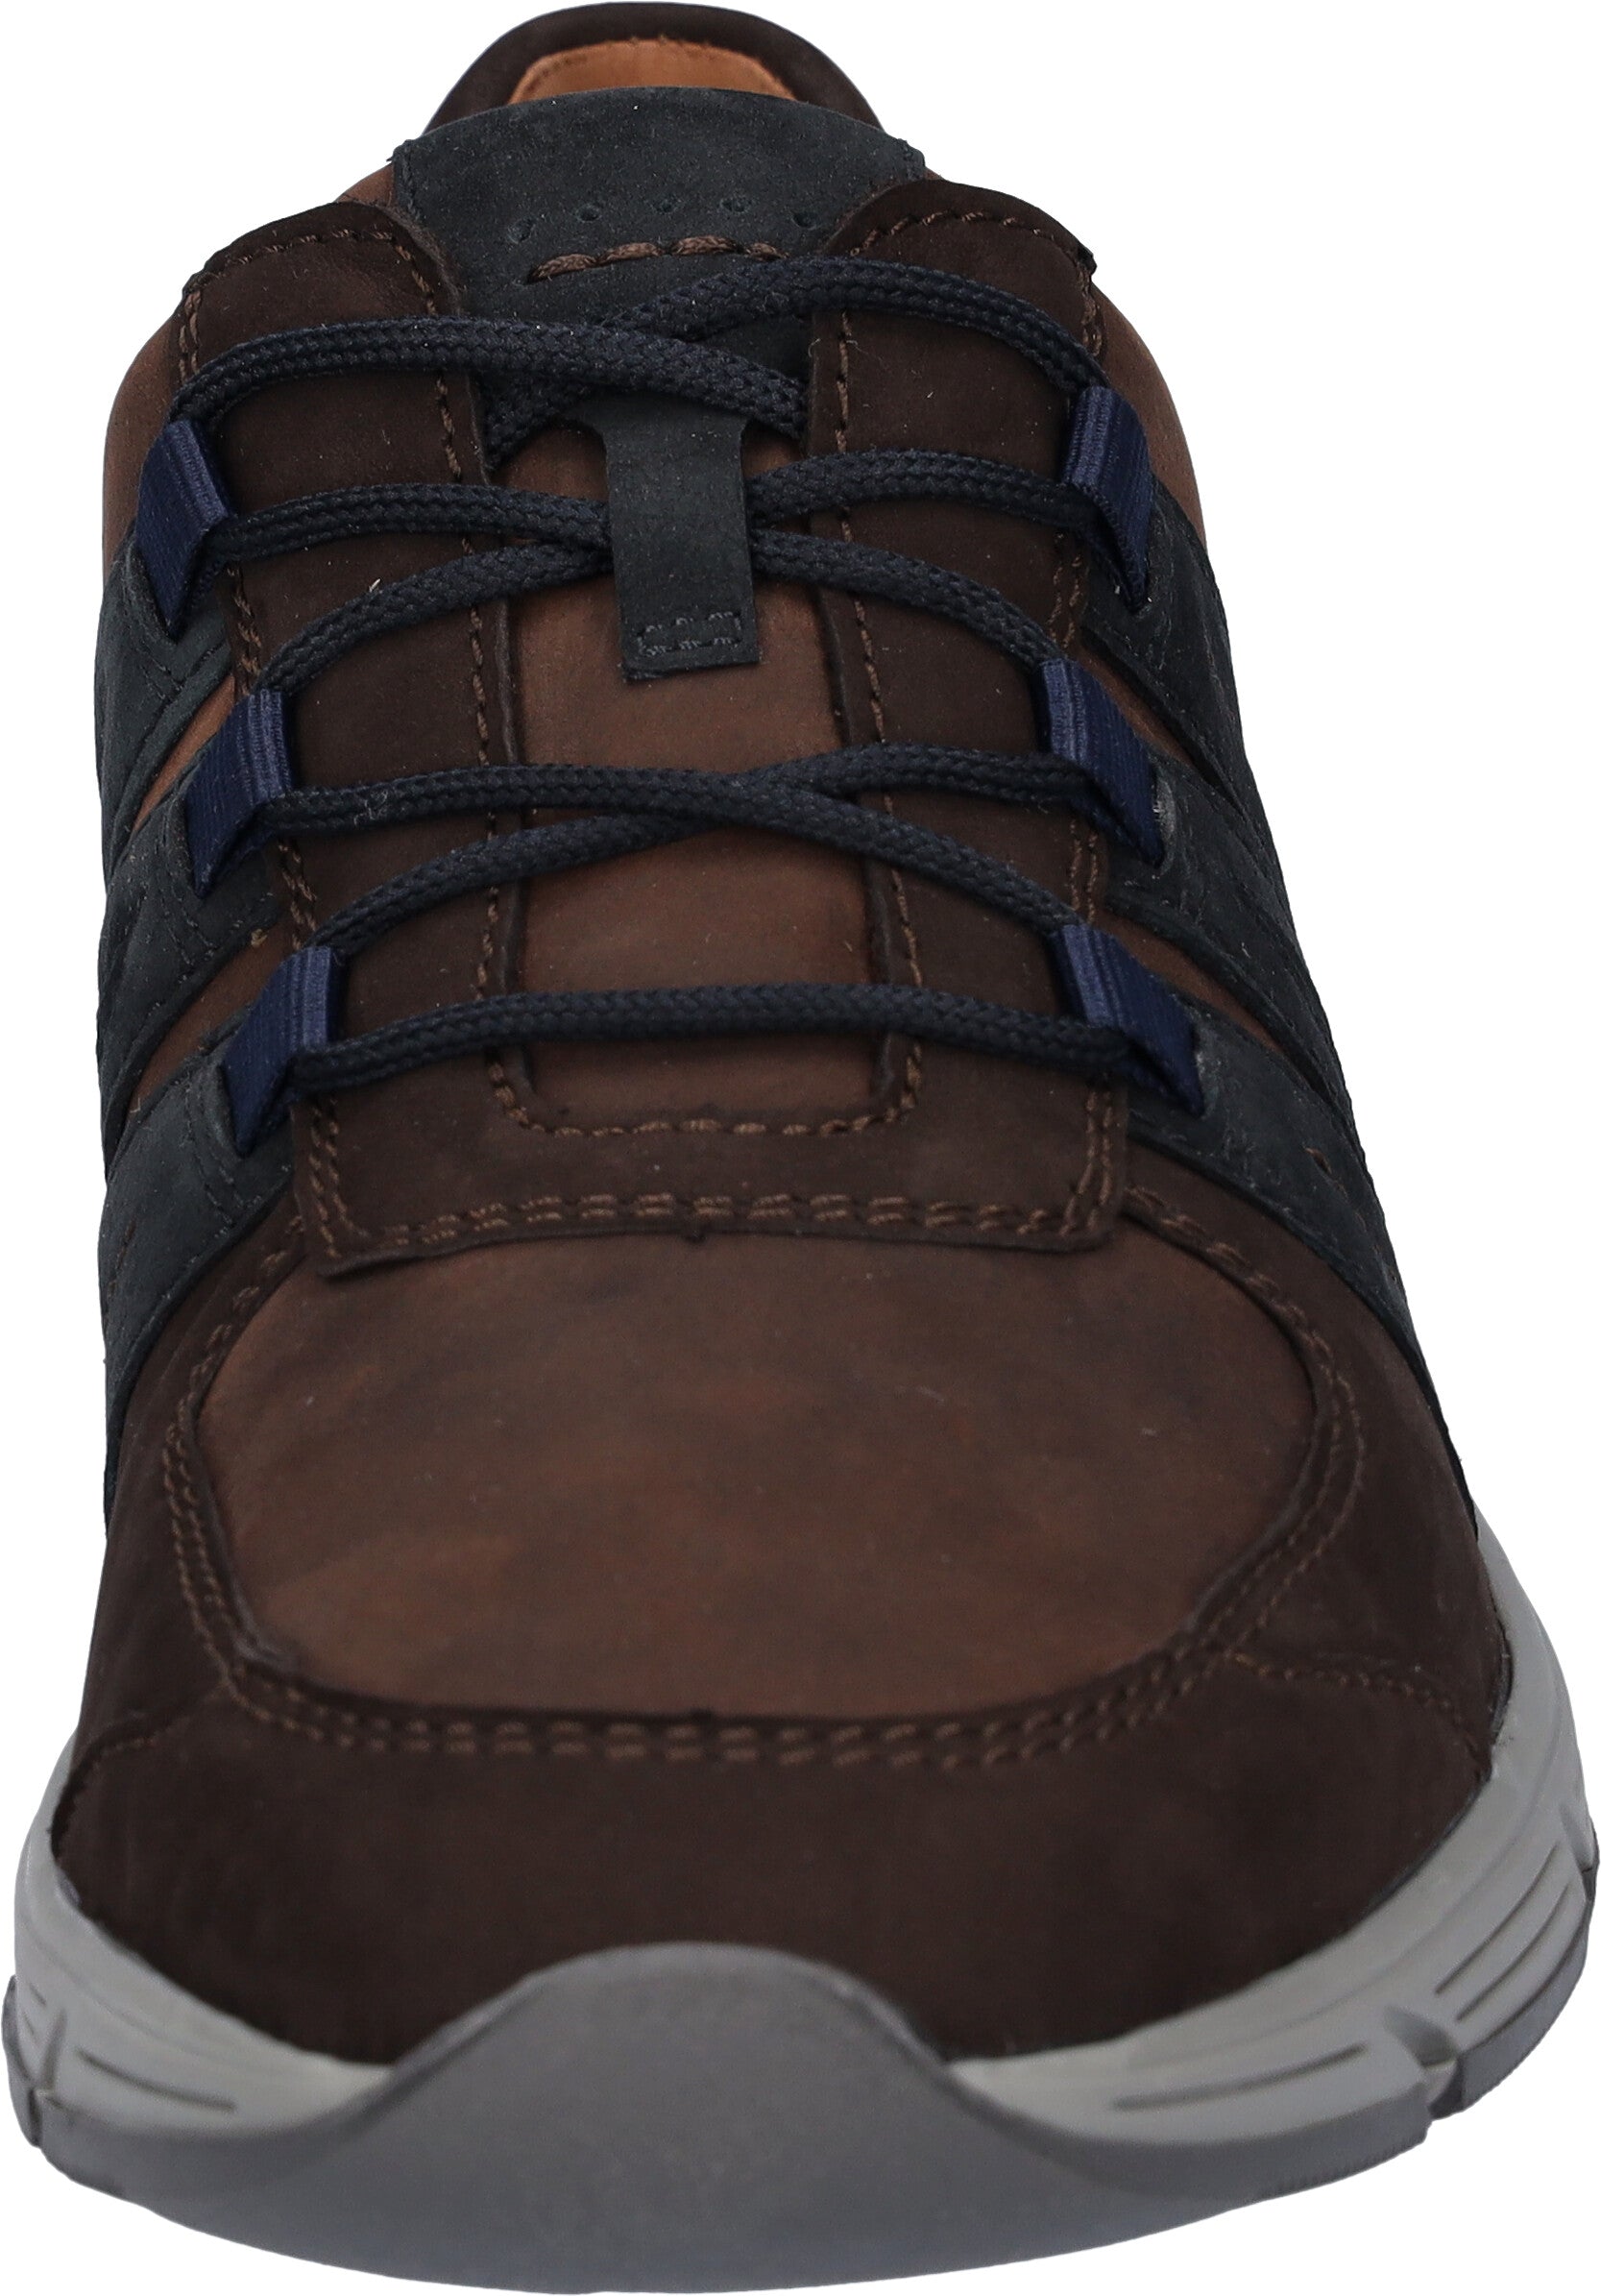 Waldlaufer 323004 429 355 Haslo Mens Crazy Horse Brown Nubuck Lace Up Shoes